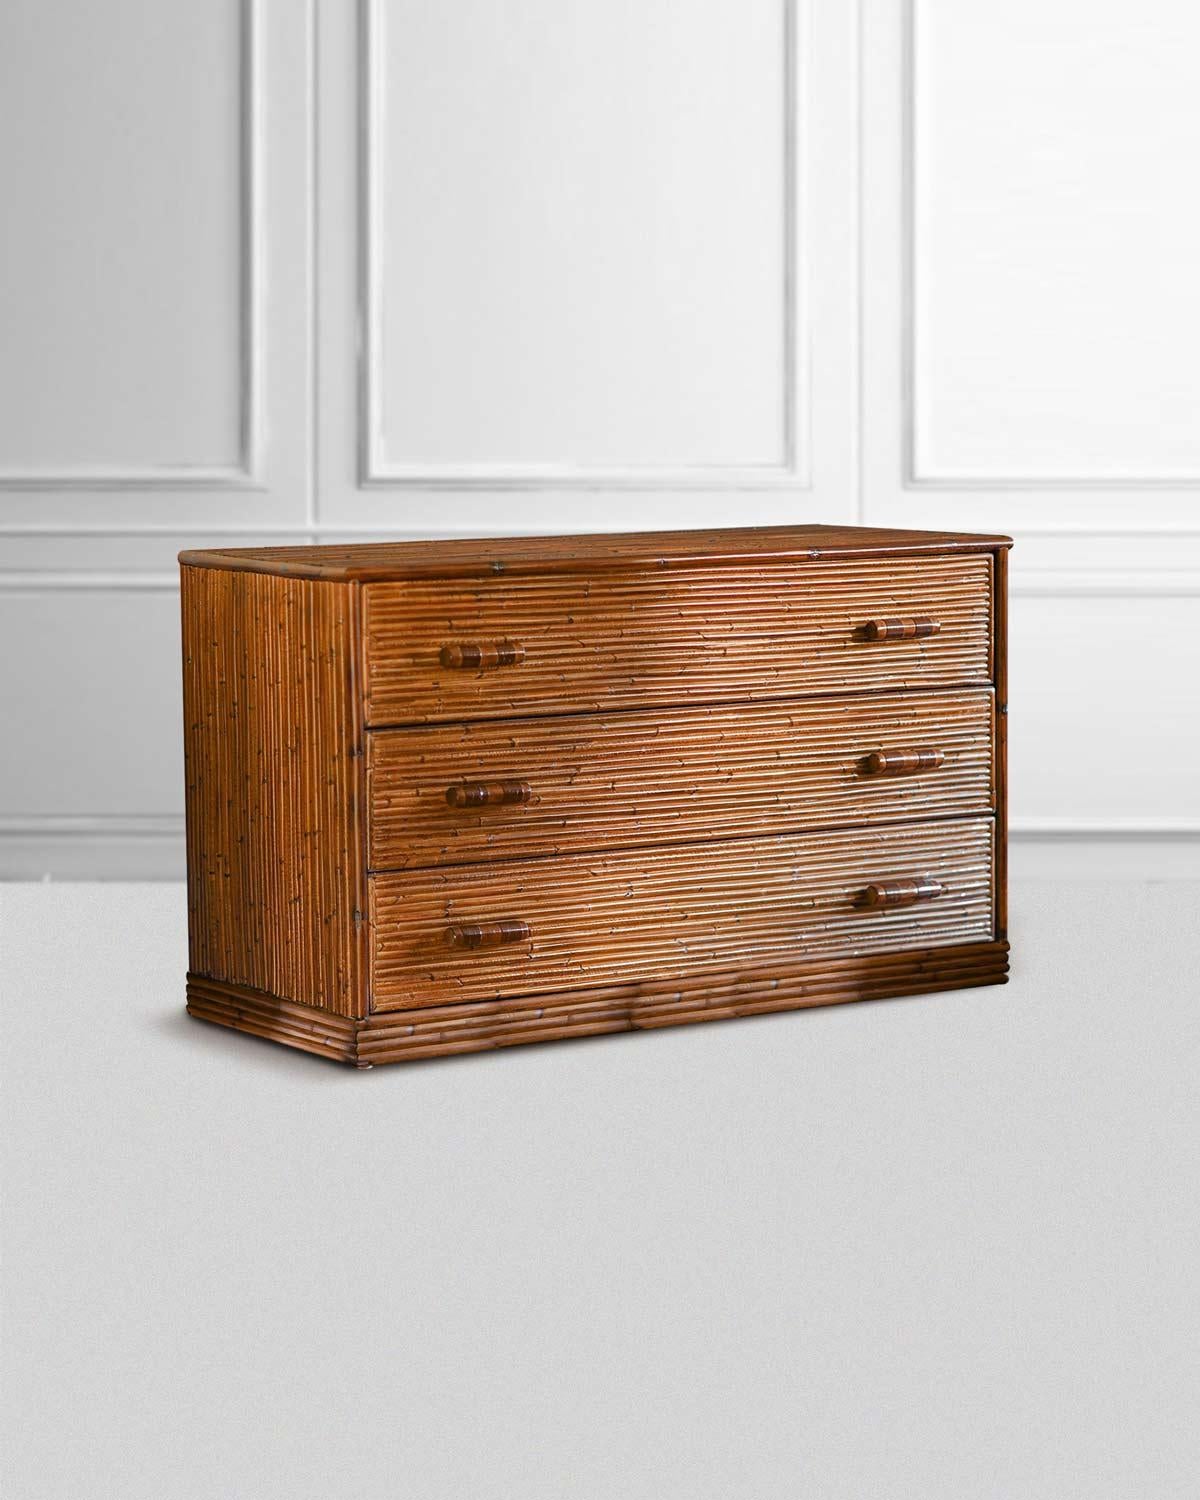 Bamboo chest of drawers with leather bindings. Italian artisanal production.
PRODUCT DETAILS
Dimensions: 104w x 73h x 46d cm
Materials: bamboo, leather
Production: Italian manufacturing